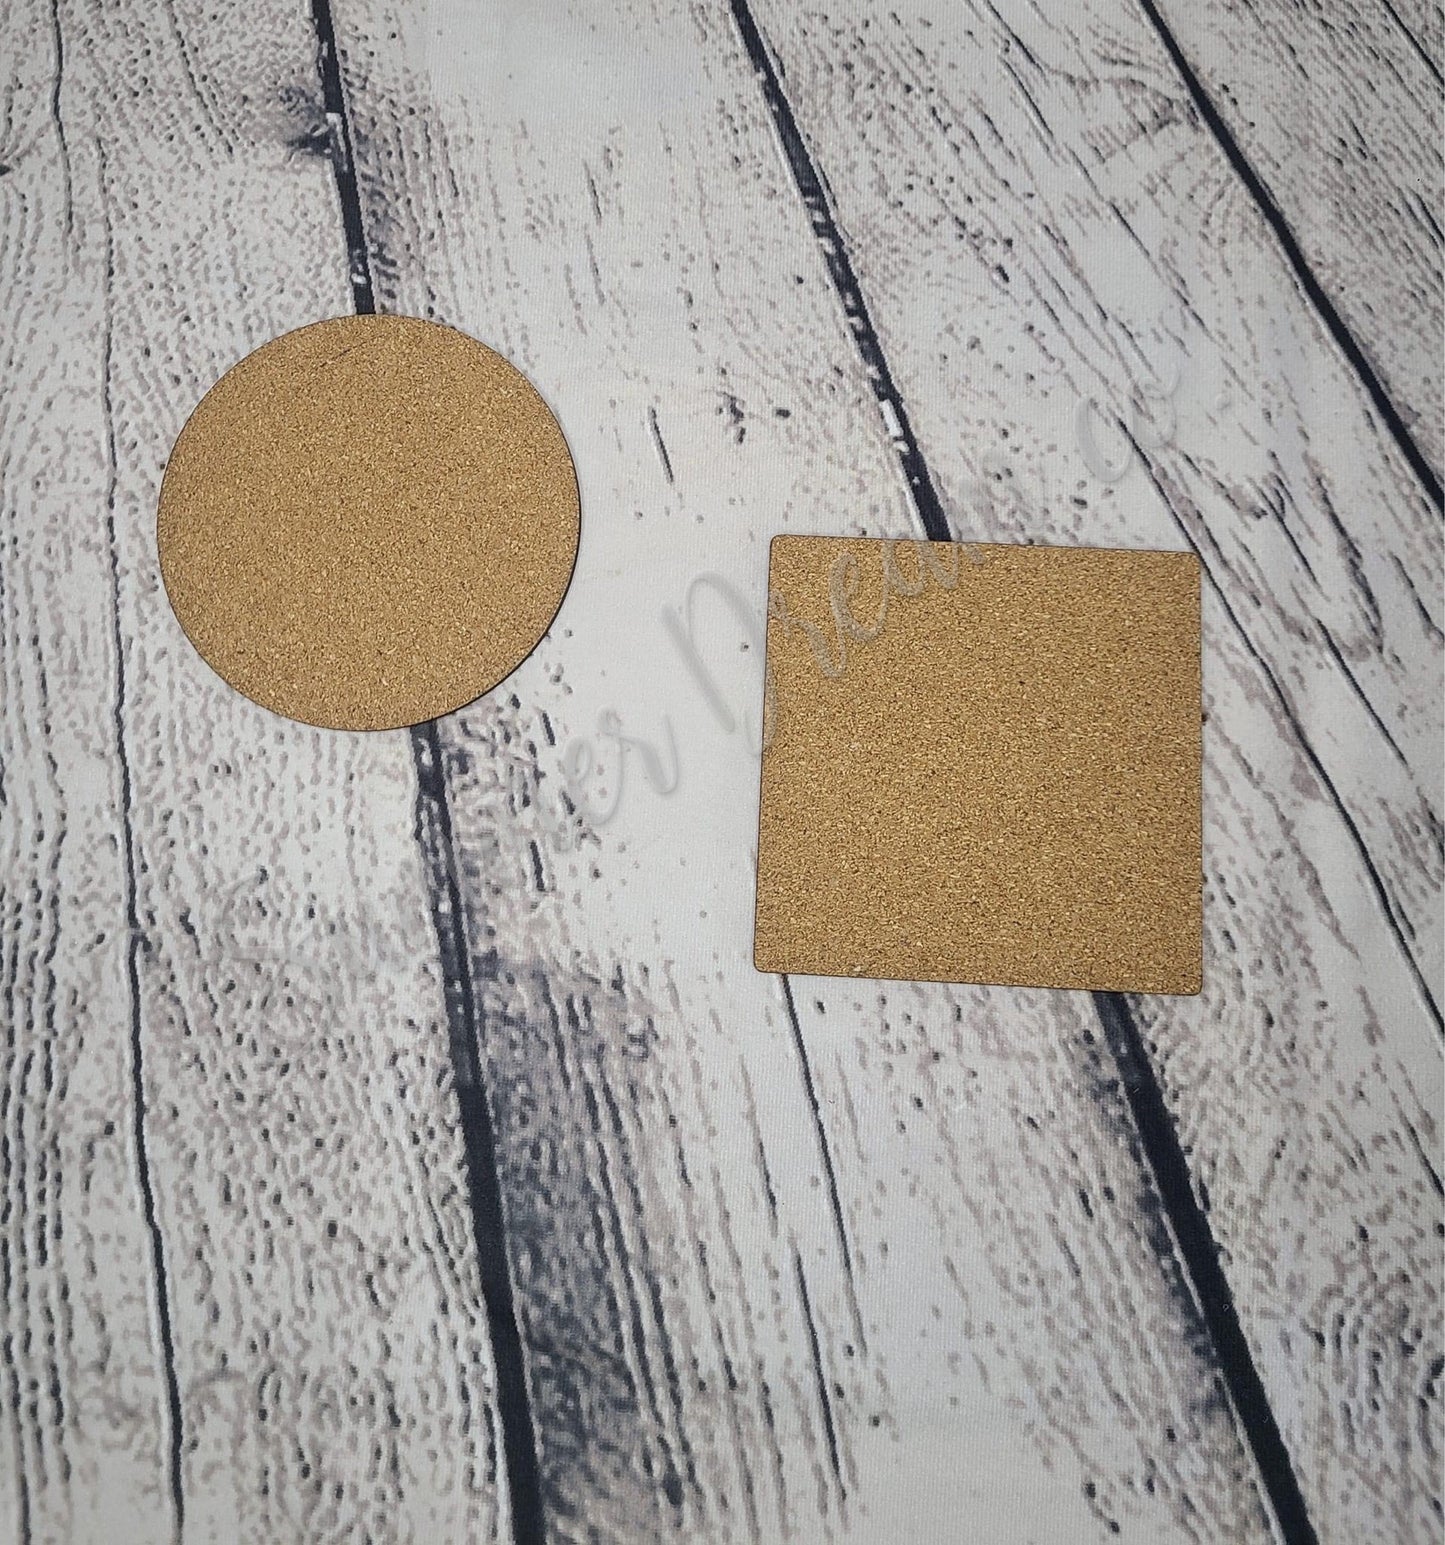 Rustic Style Coaster